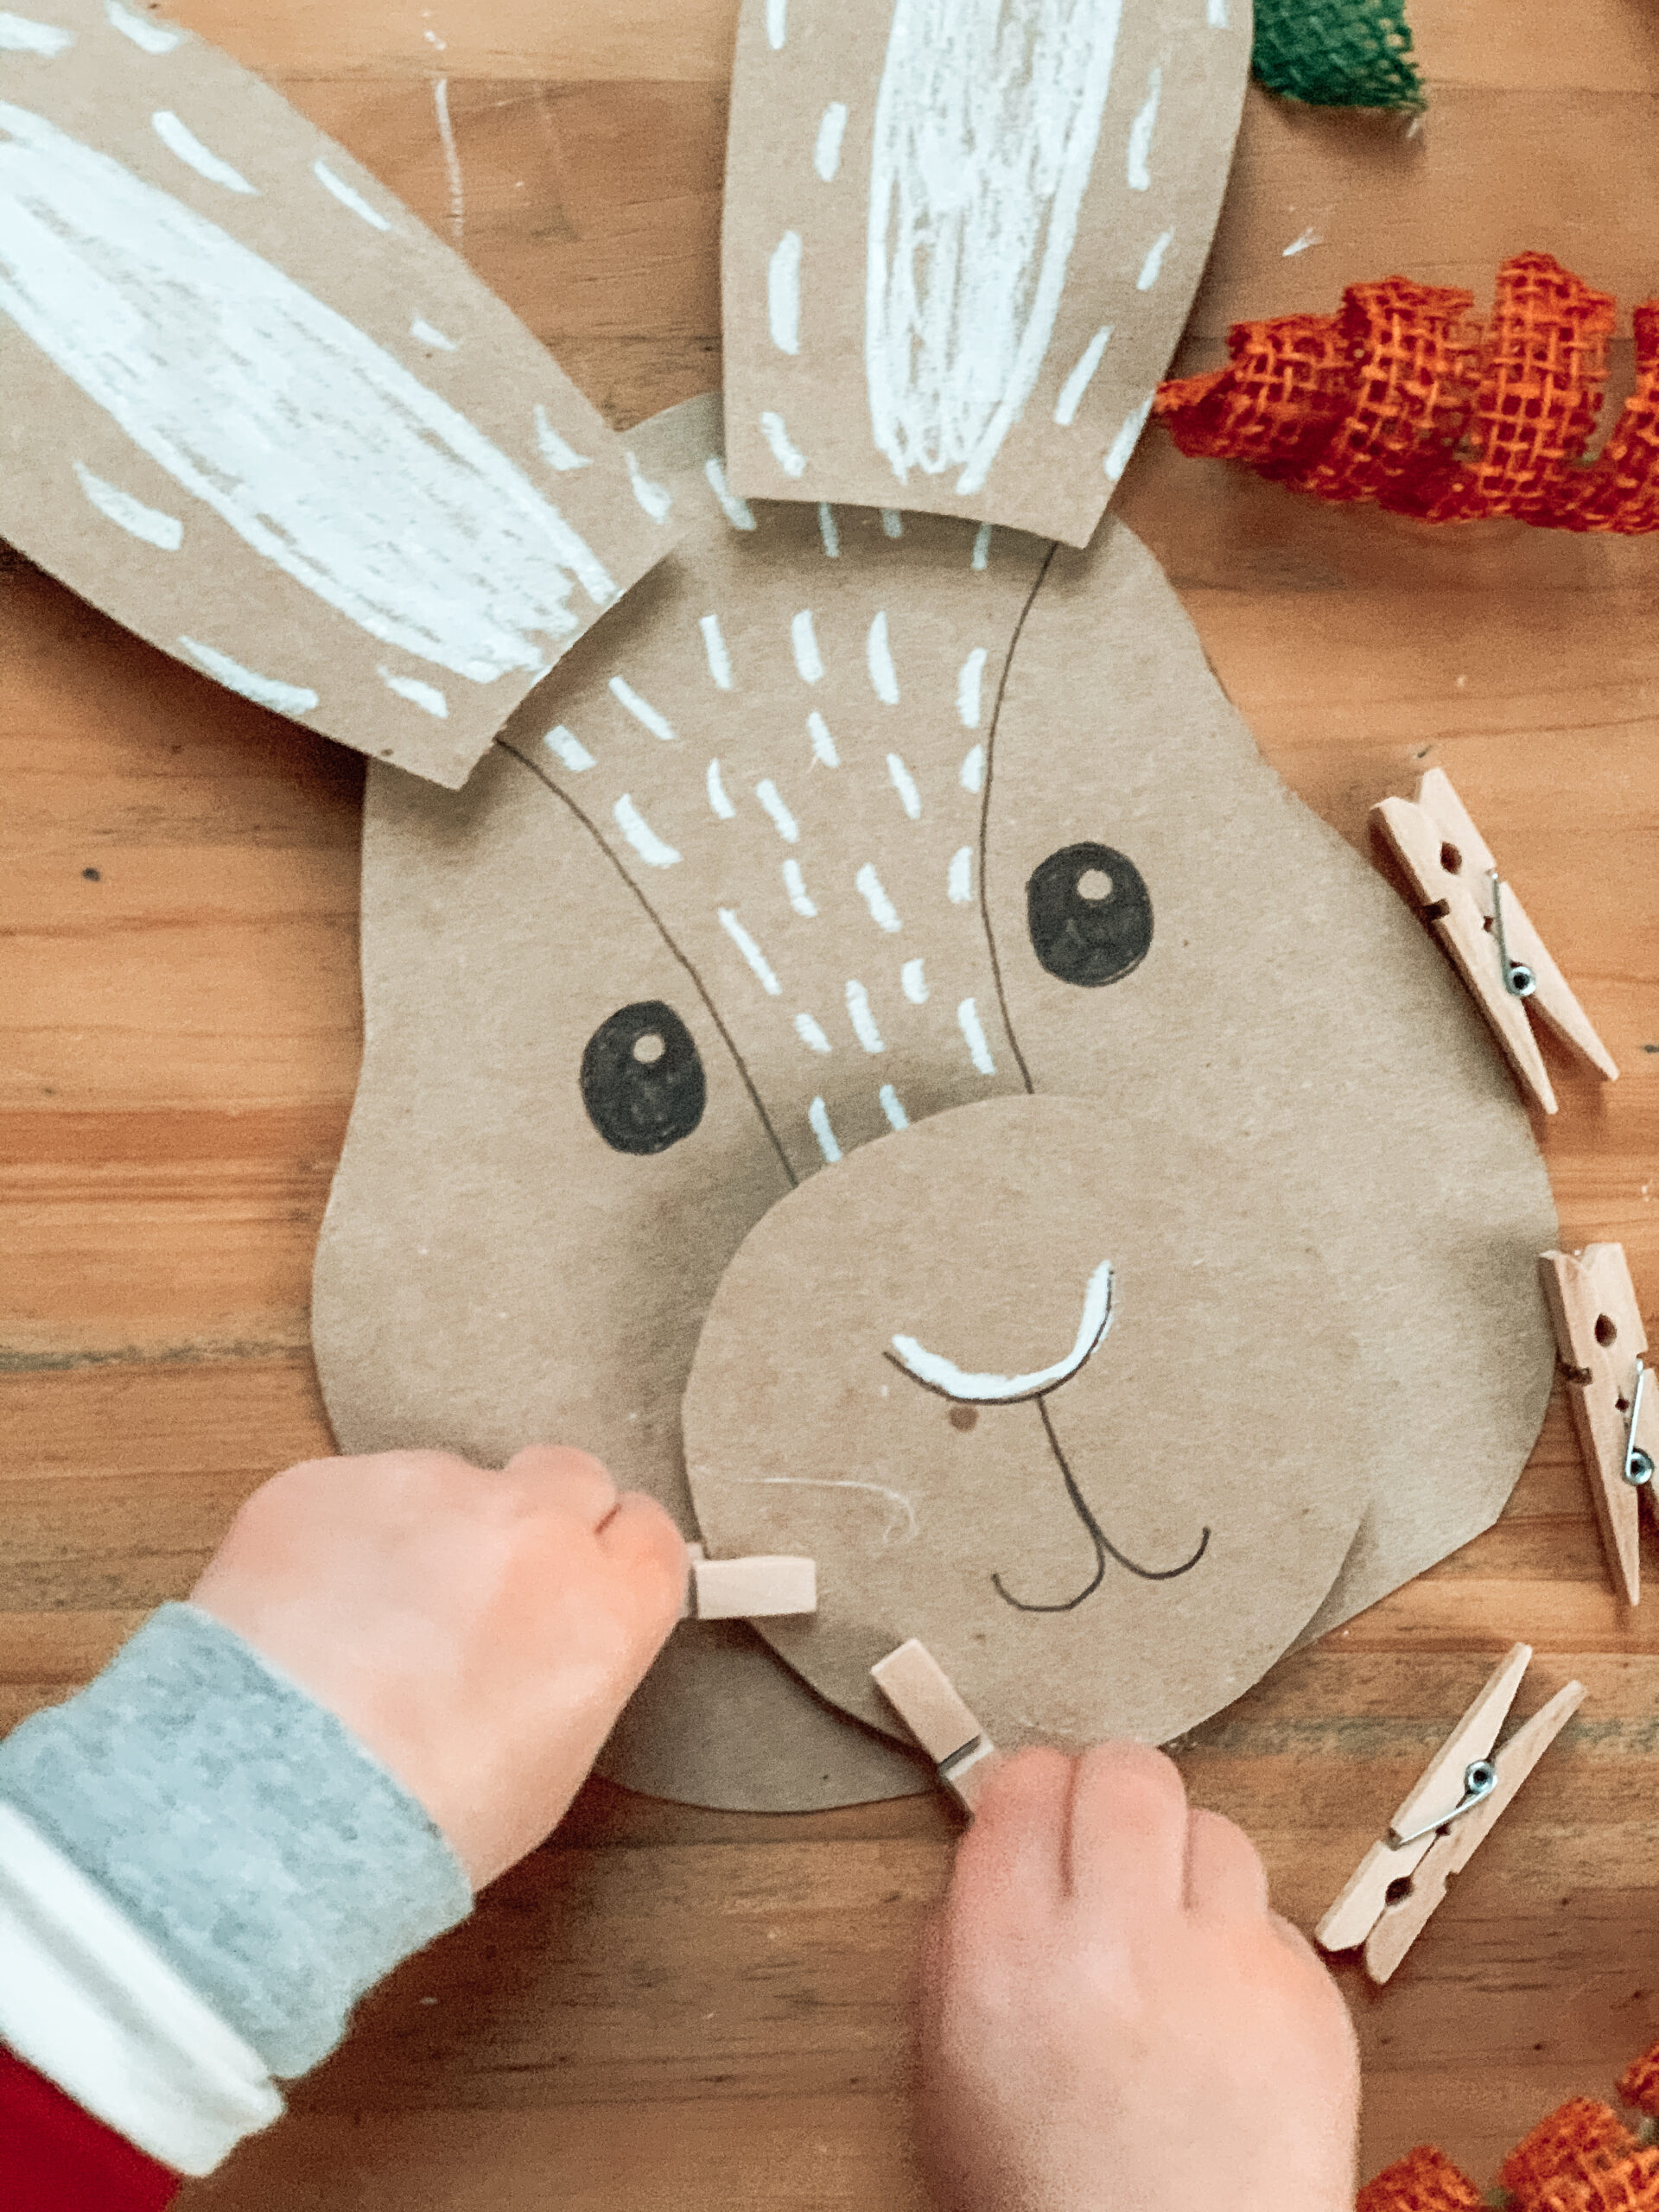 Child playing with Easter bunny craft made of cardboard and clothespins